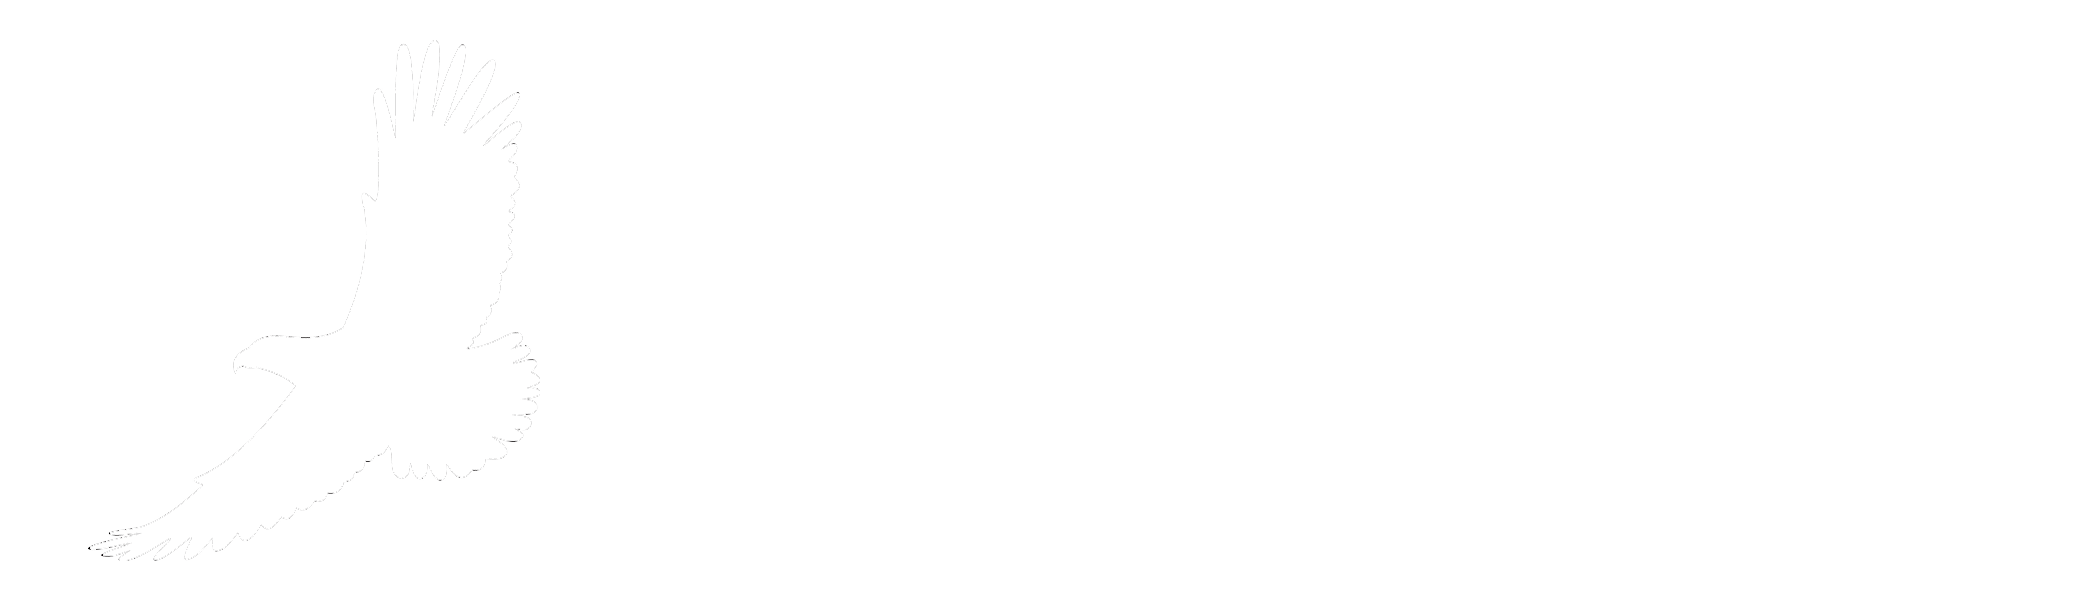 Eagle Creek Recovery Center